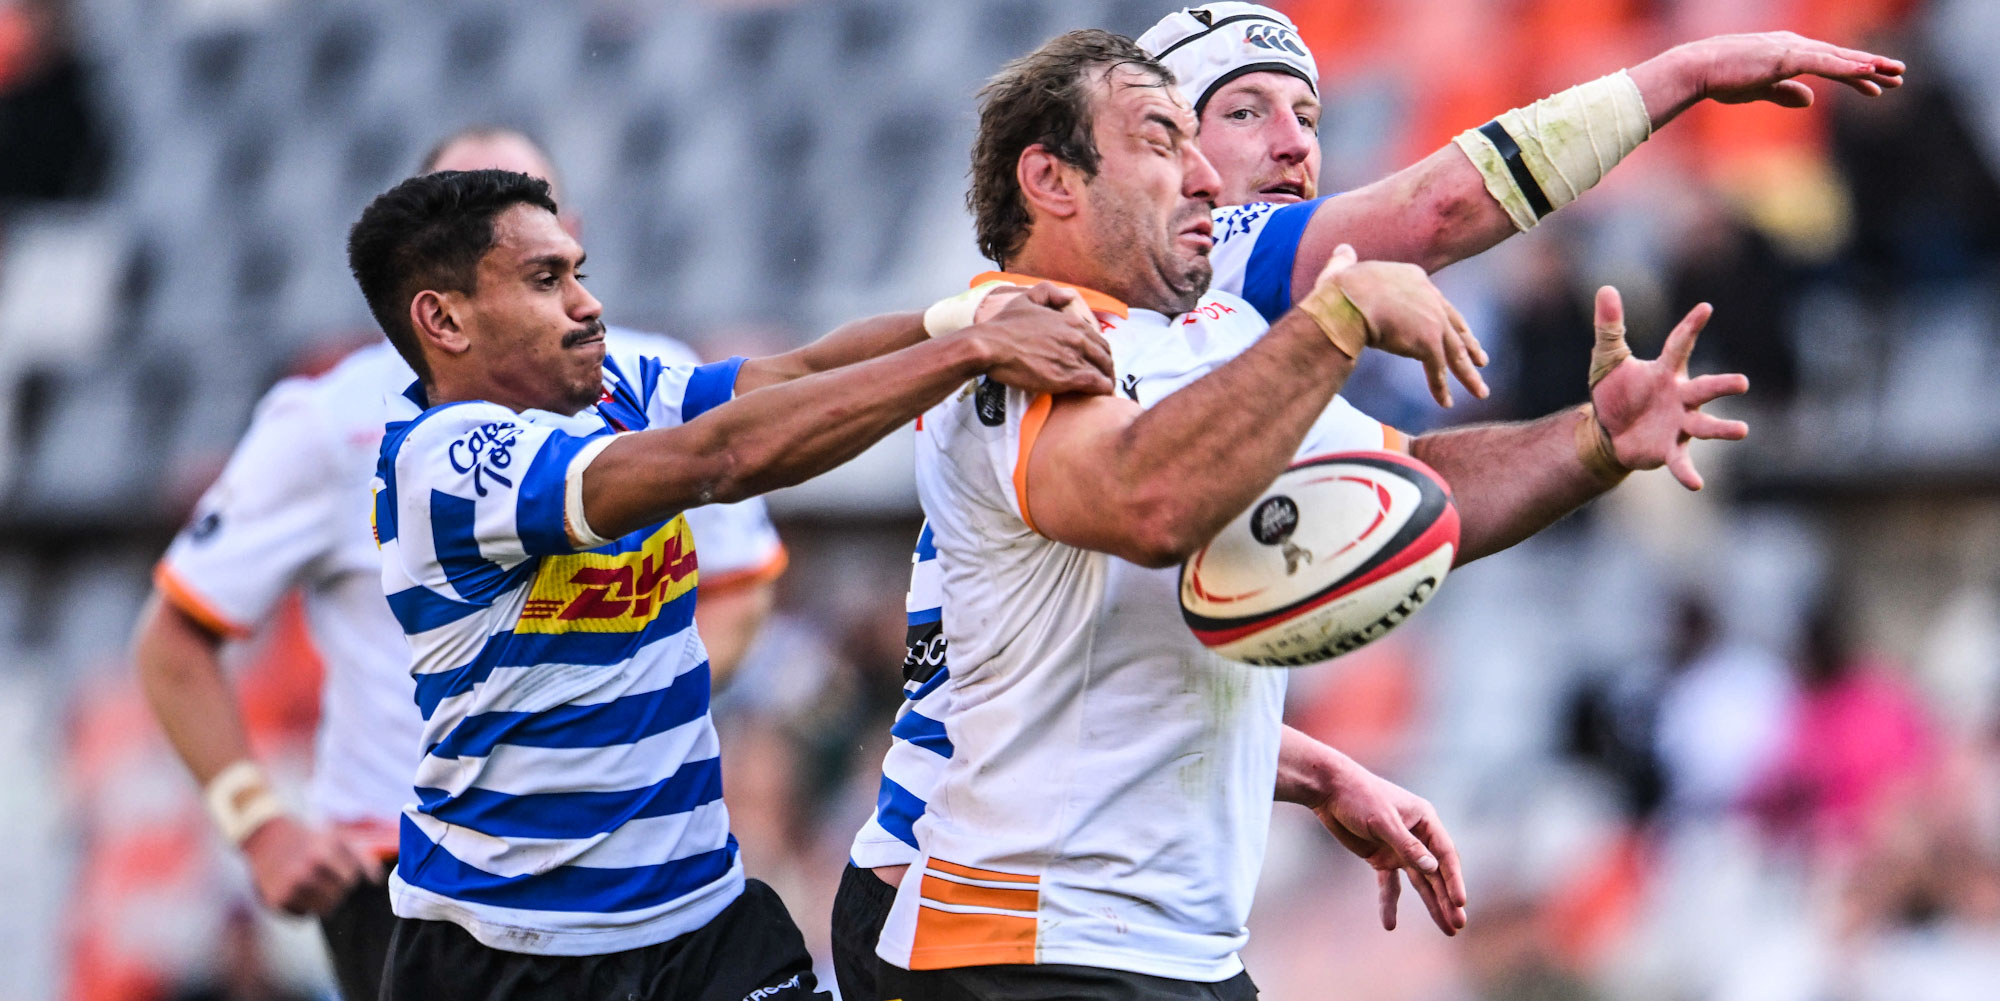 Jeandre Rudolph of the Toyota Cheetahs tries to evade two DHL WP players.